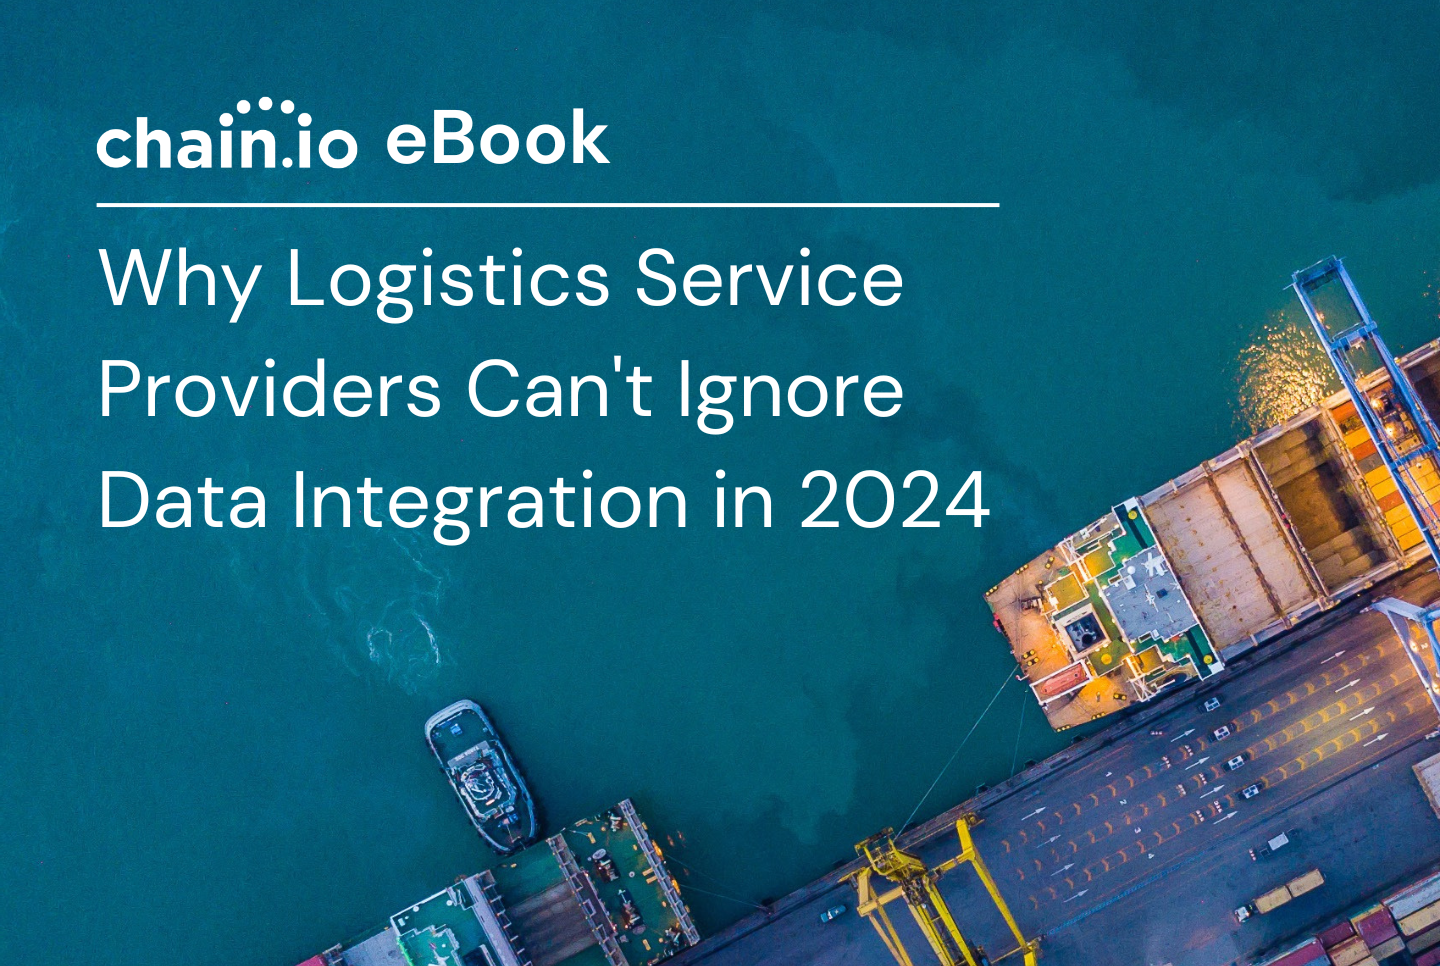 Why Logistics Service Providers Cant Ignore Data Integration in 2024